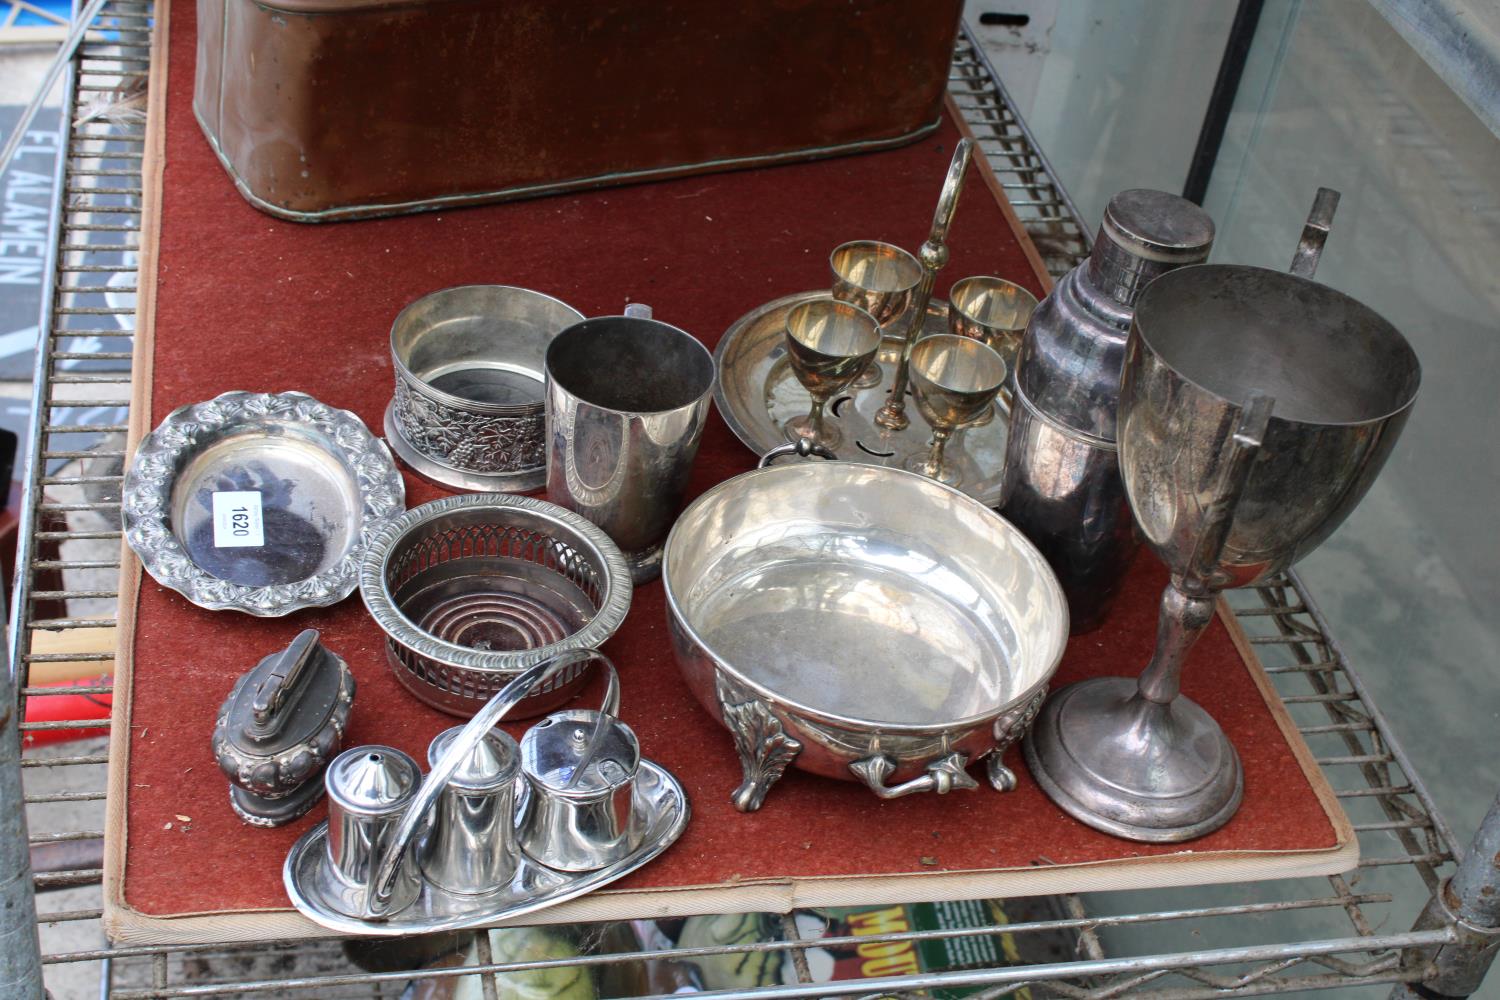 AN ASSORTMENT OF SILVER PLATED ITEMS TO INCLUDE A TROPHY, A COCKTAIL SHAKER AND WINE BOTTLE COASTERS - Image 2 of 2